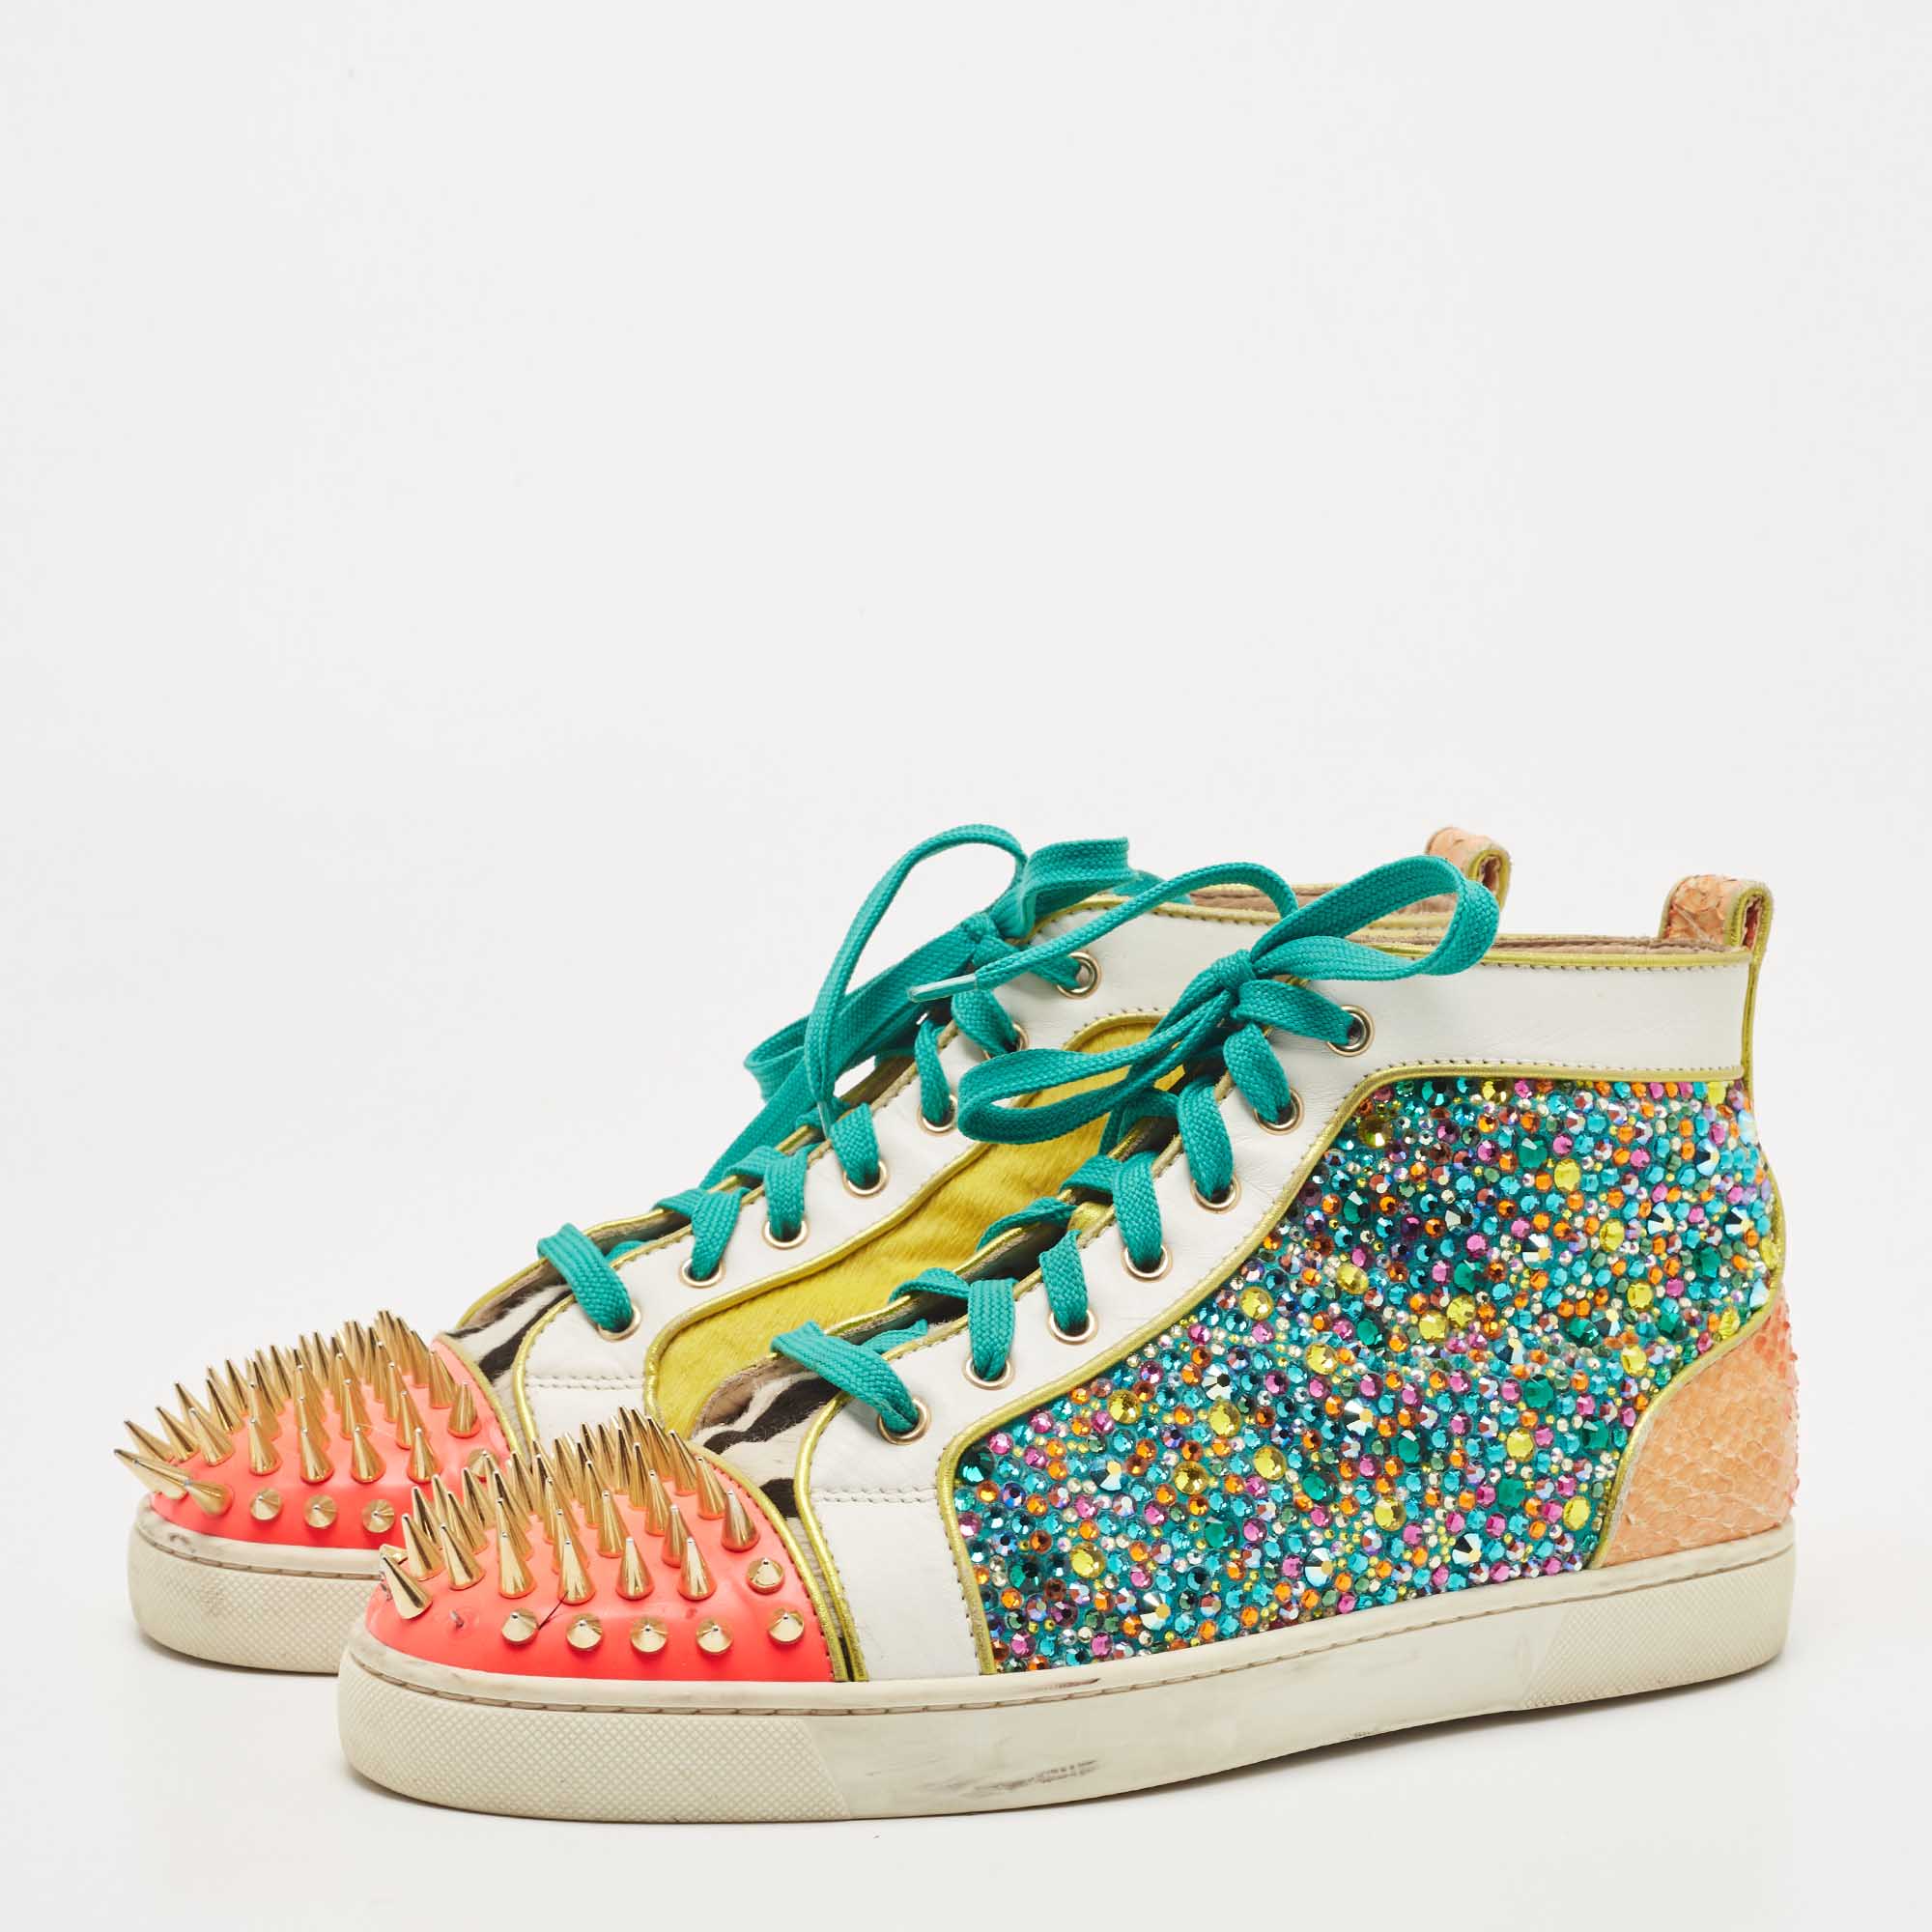 

Christian Louboutin Multicolor Crystal Embellished Suede, Calf Hair and Patent Leather No Limit Spikes Sneakers Size